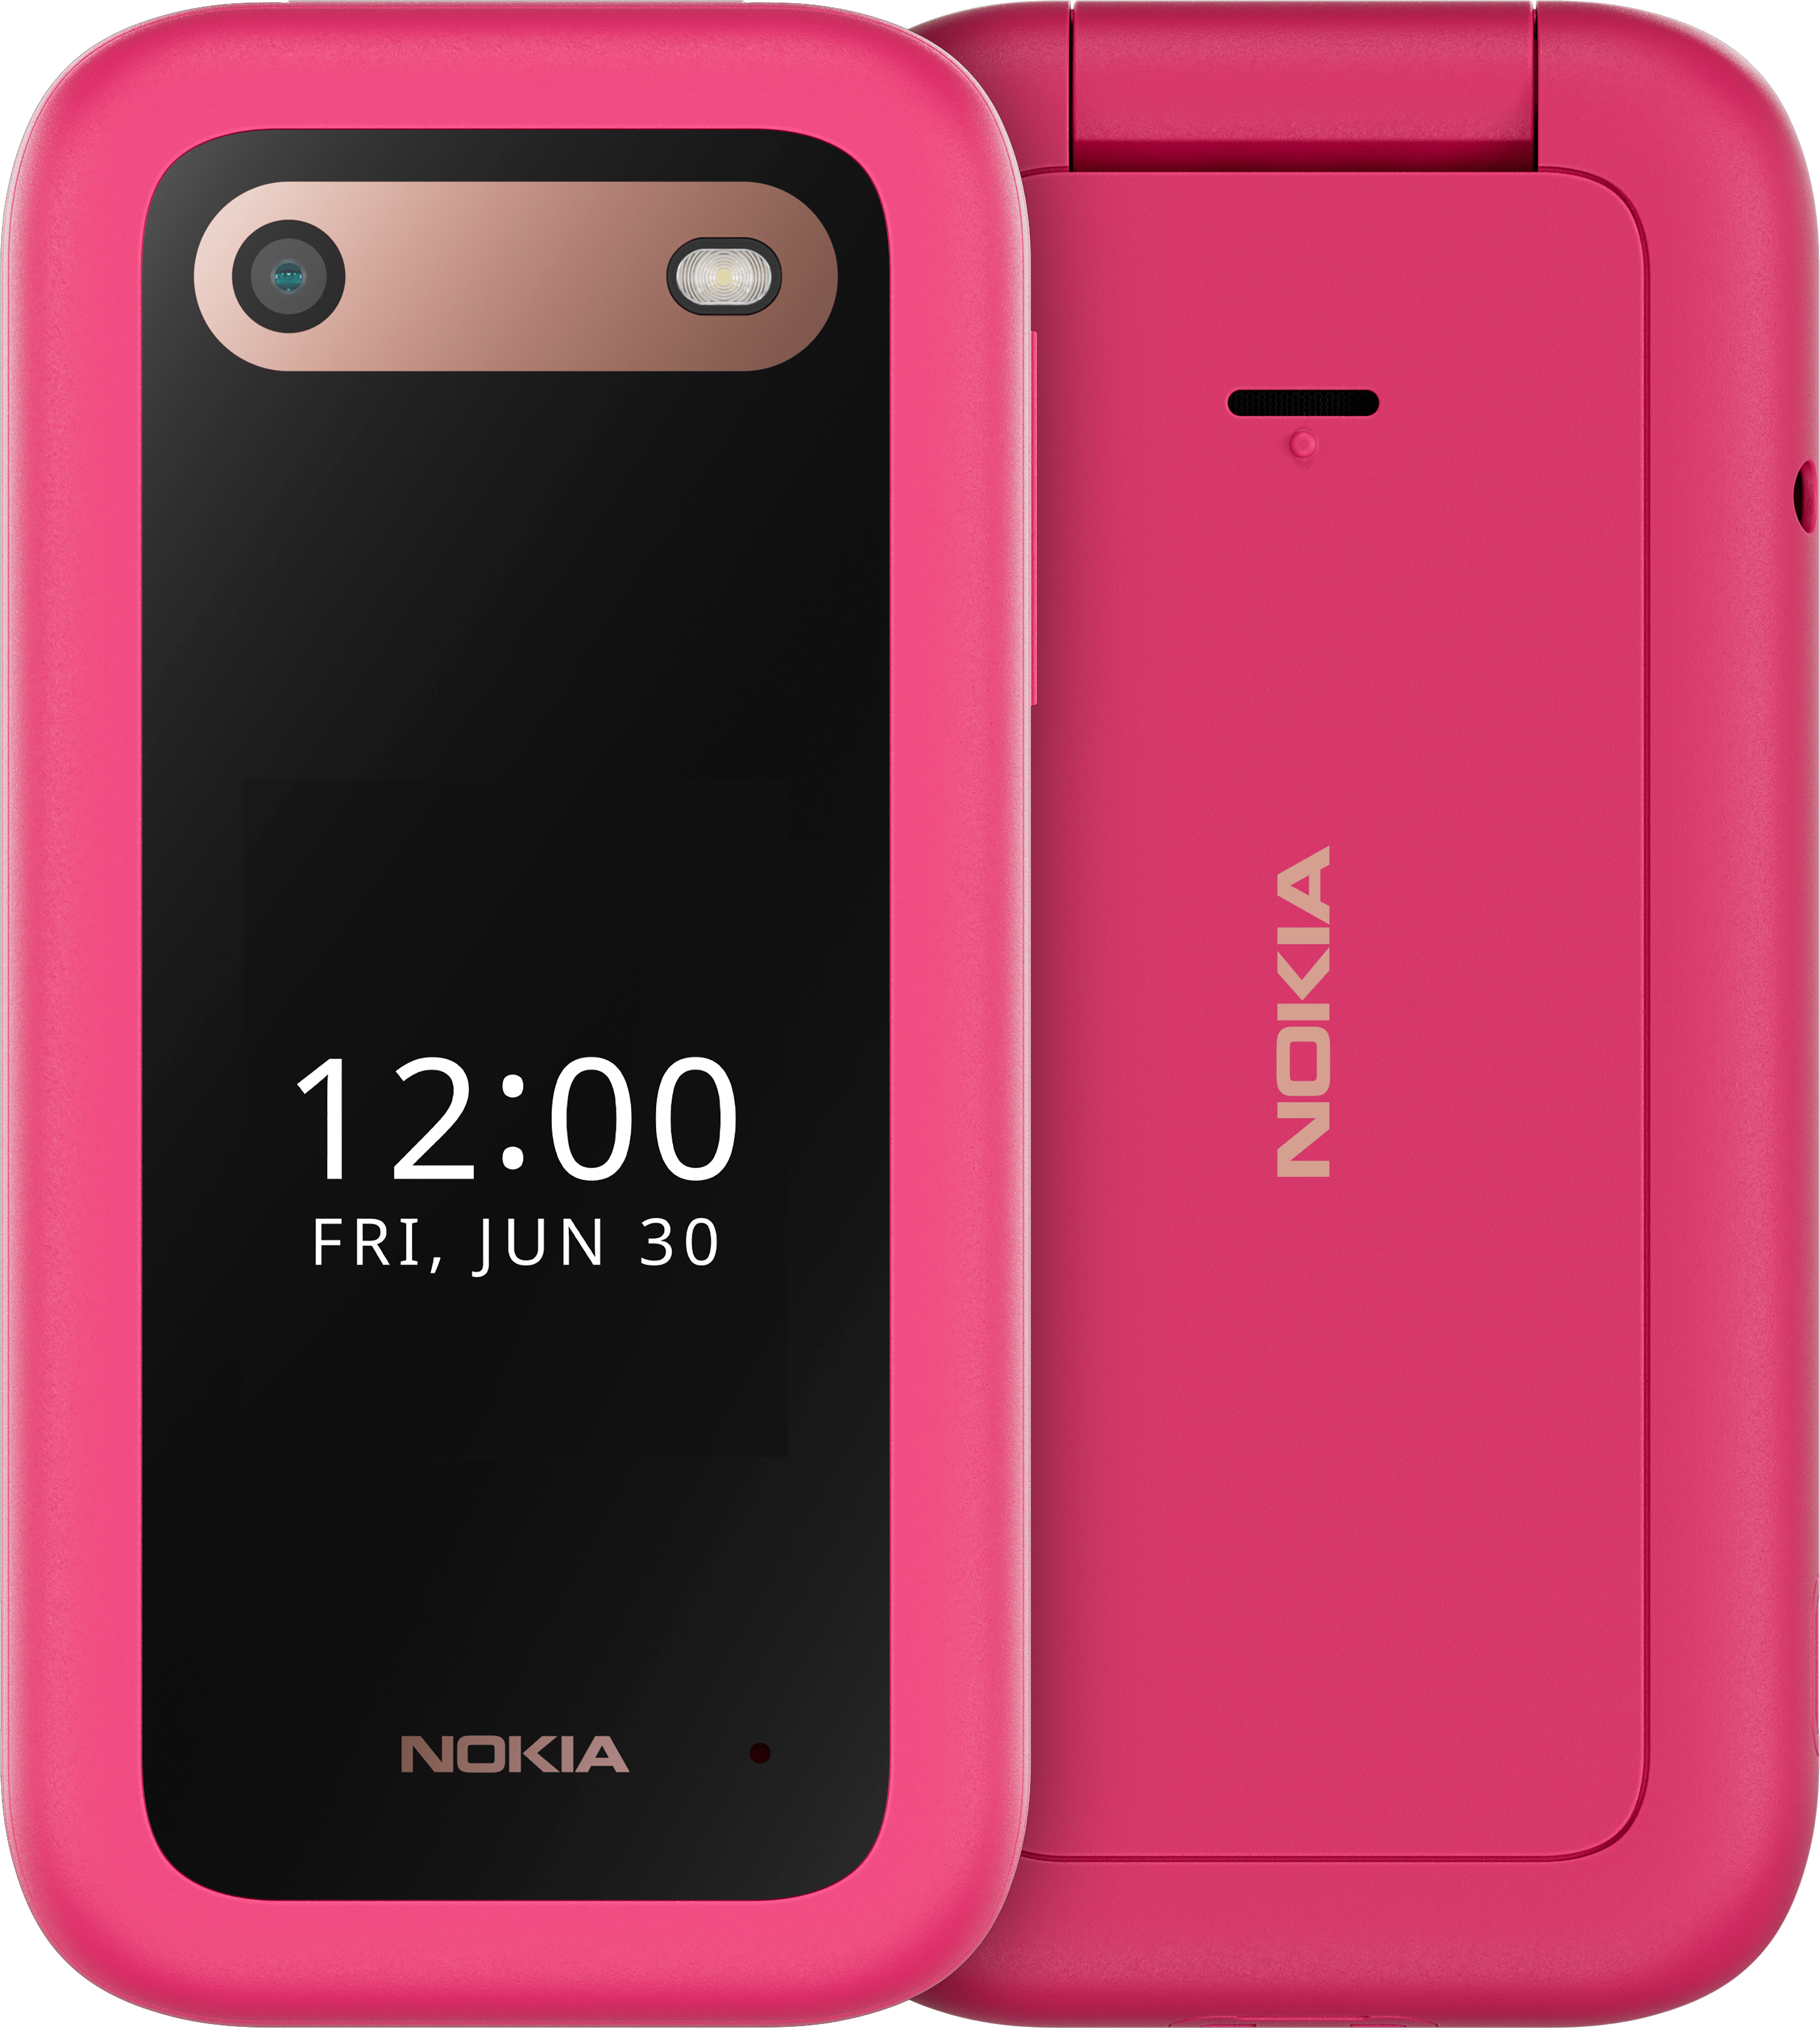 Repairable and fashionable: Nokia G42 5G goes So Pink